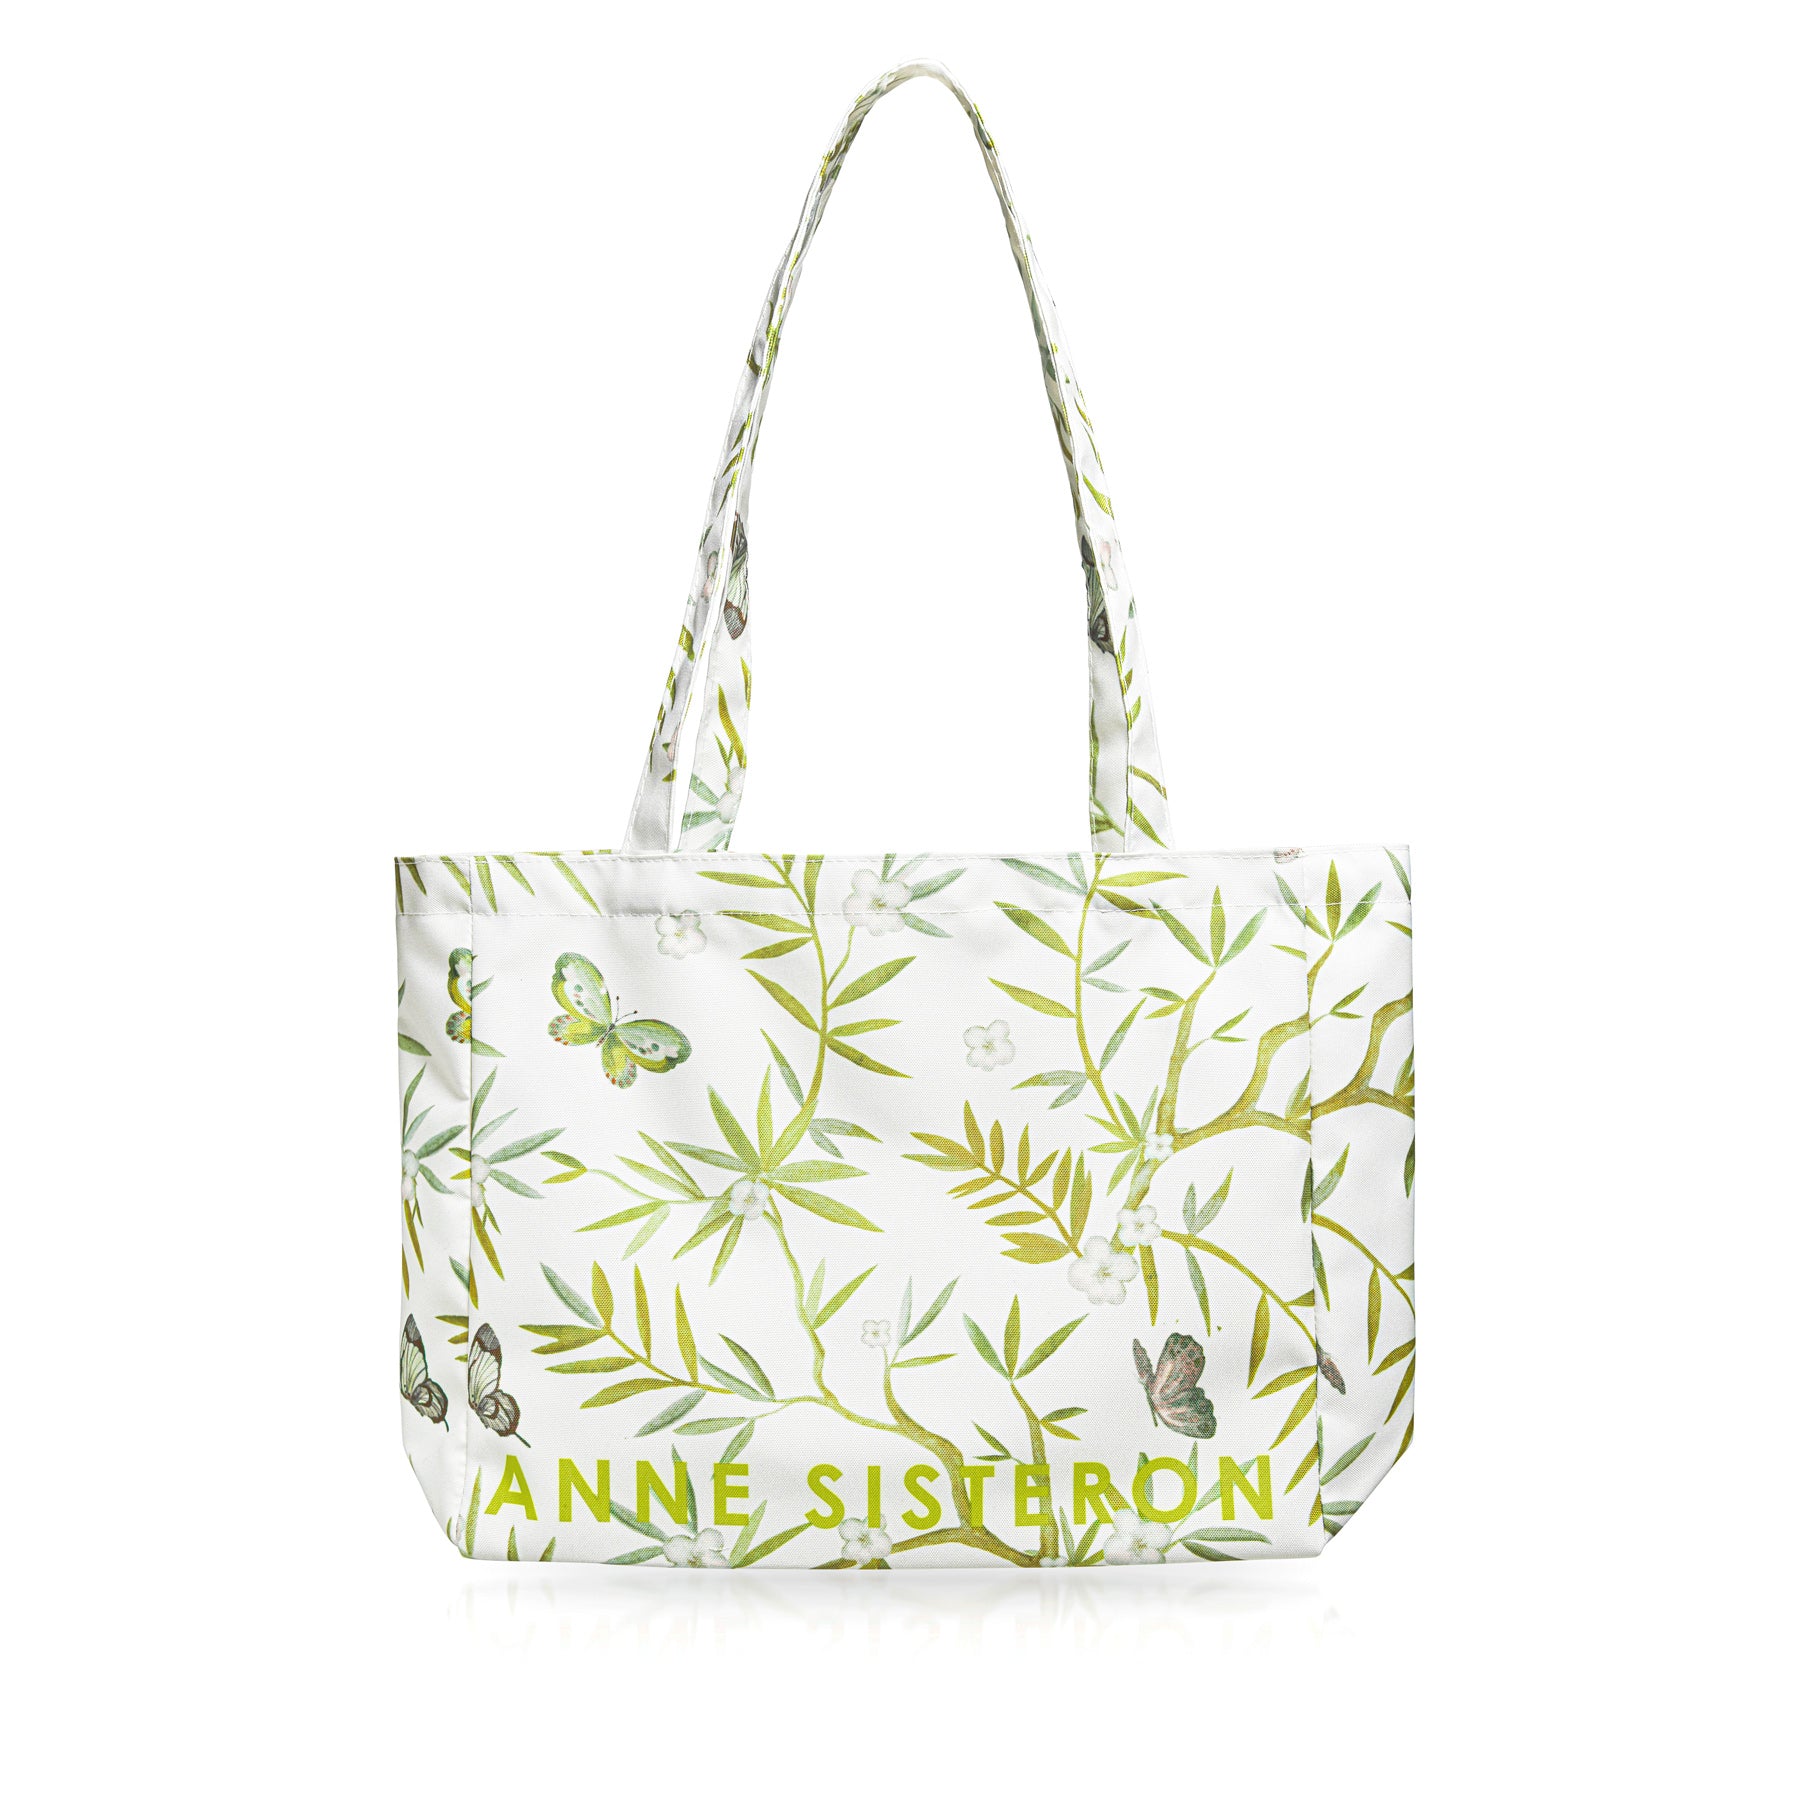 Limited Edition Anne Sisteron Tote Bag